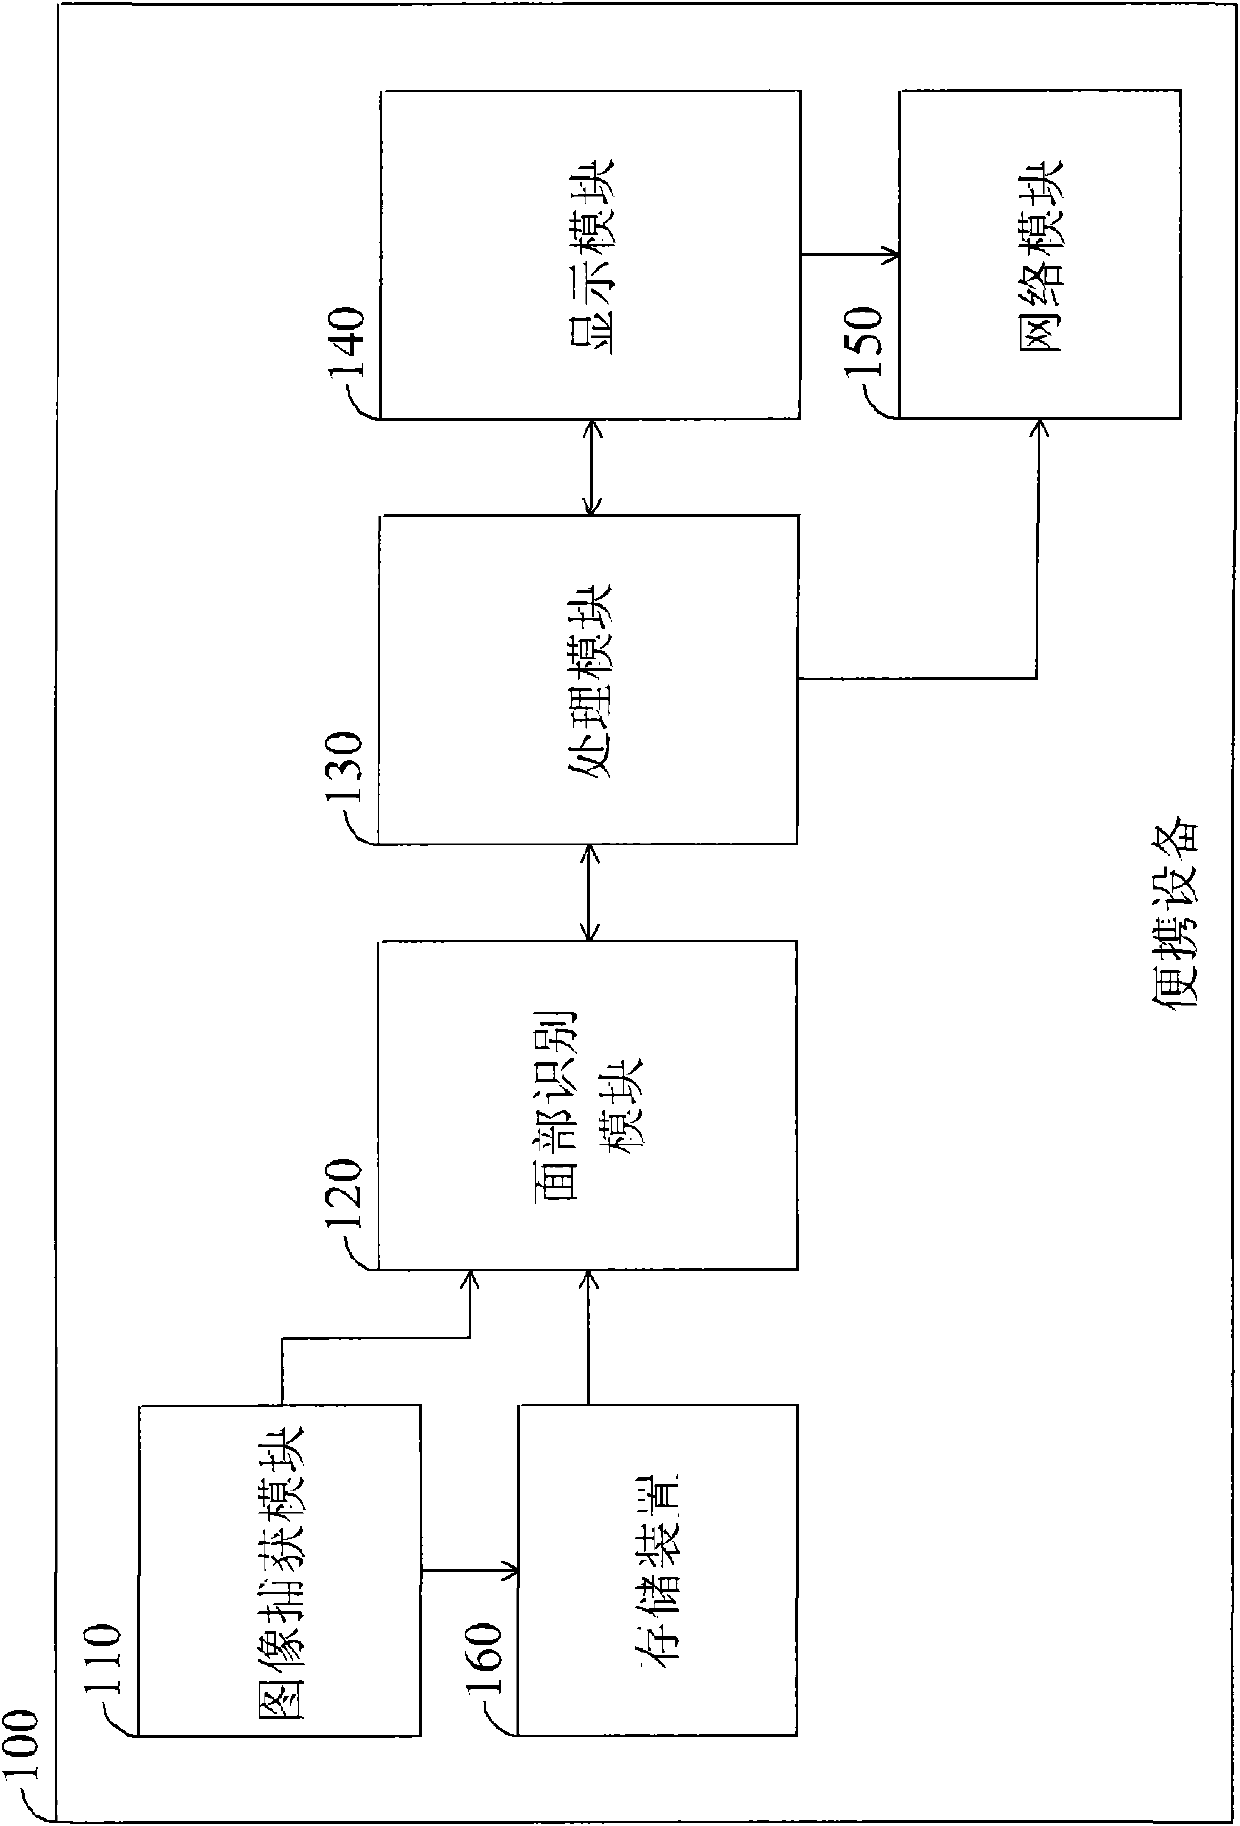 Picture sharing methods for portable device